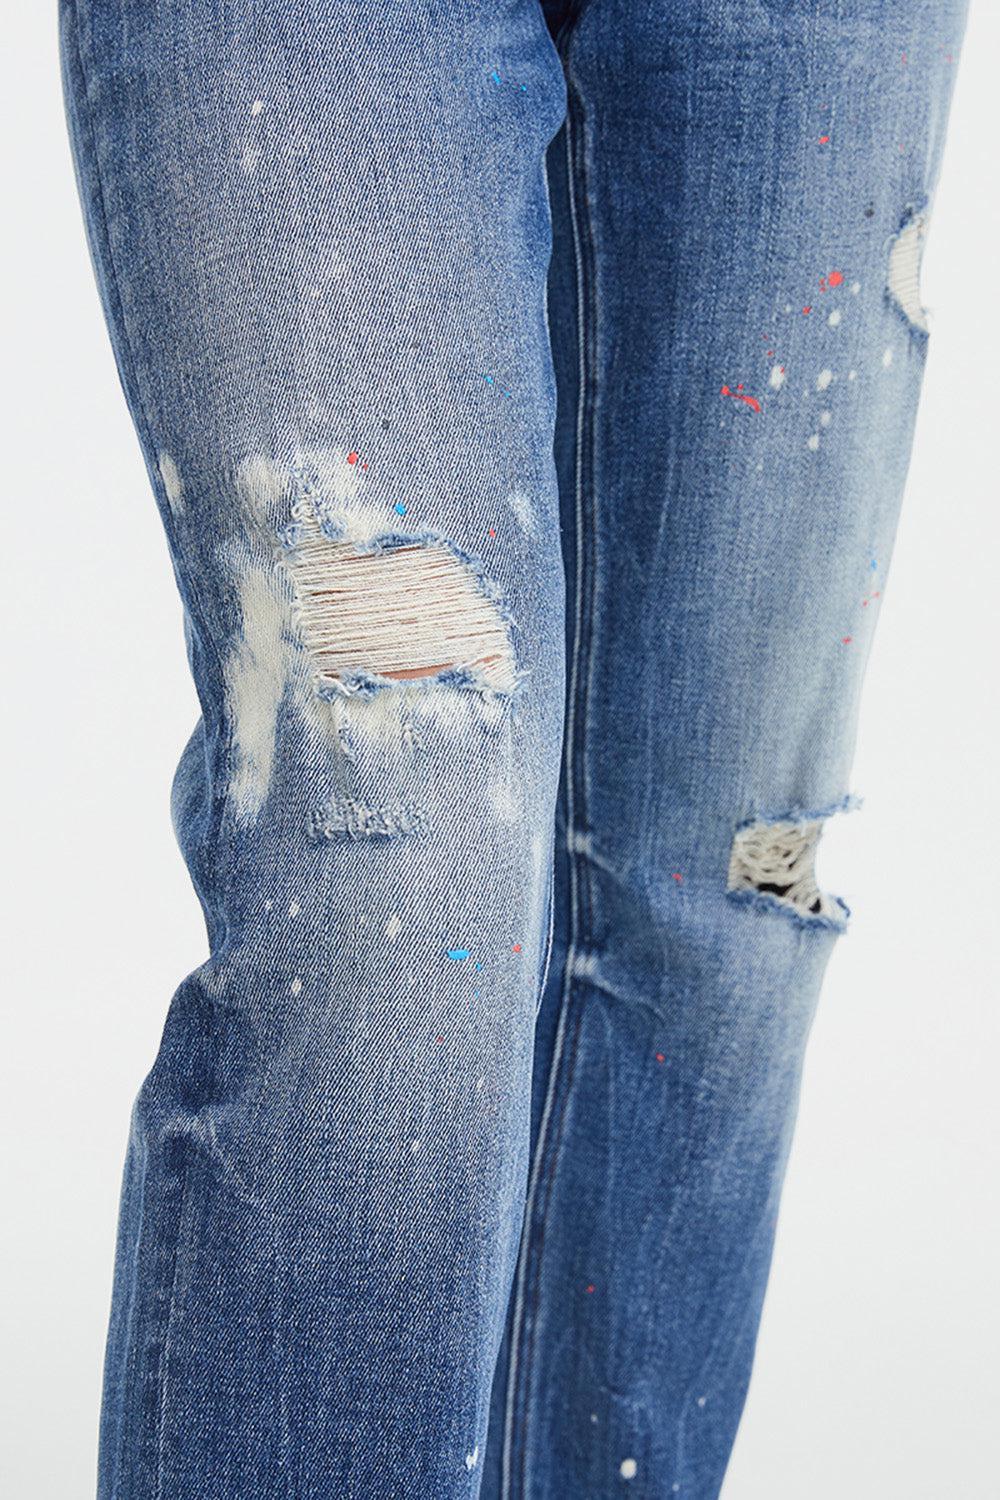 a pair of jeans that have been ripped and have been worn